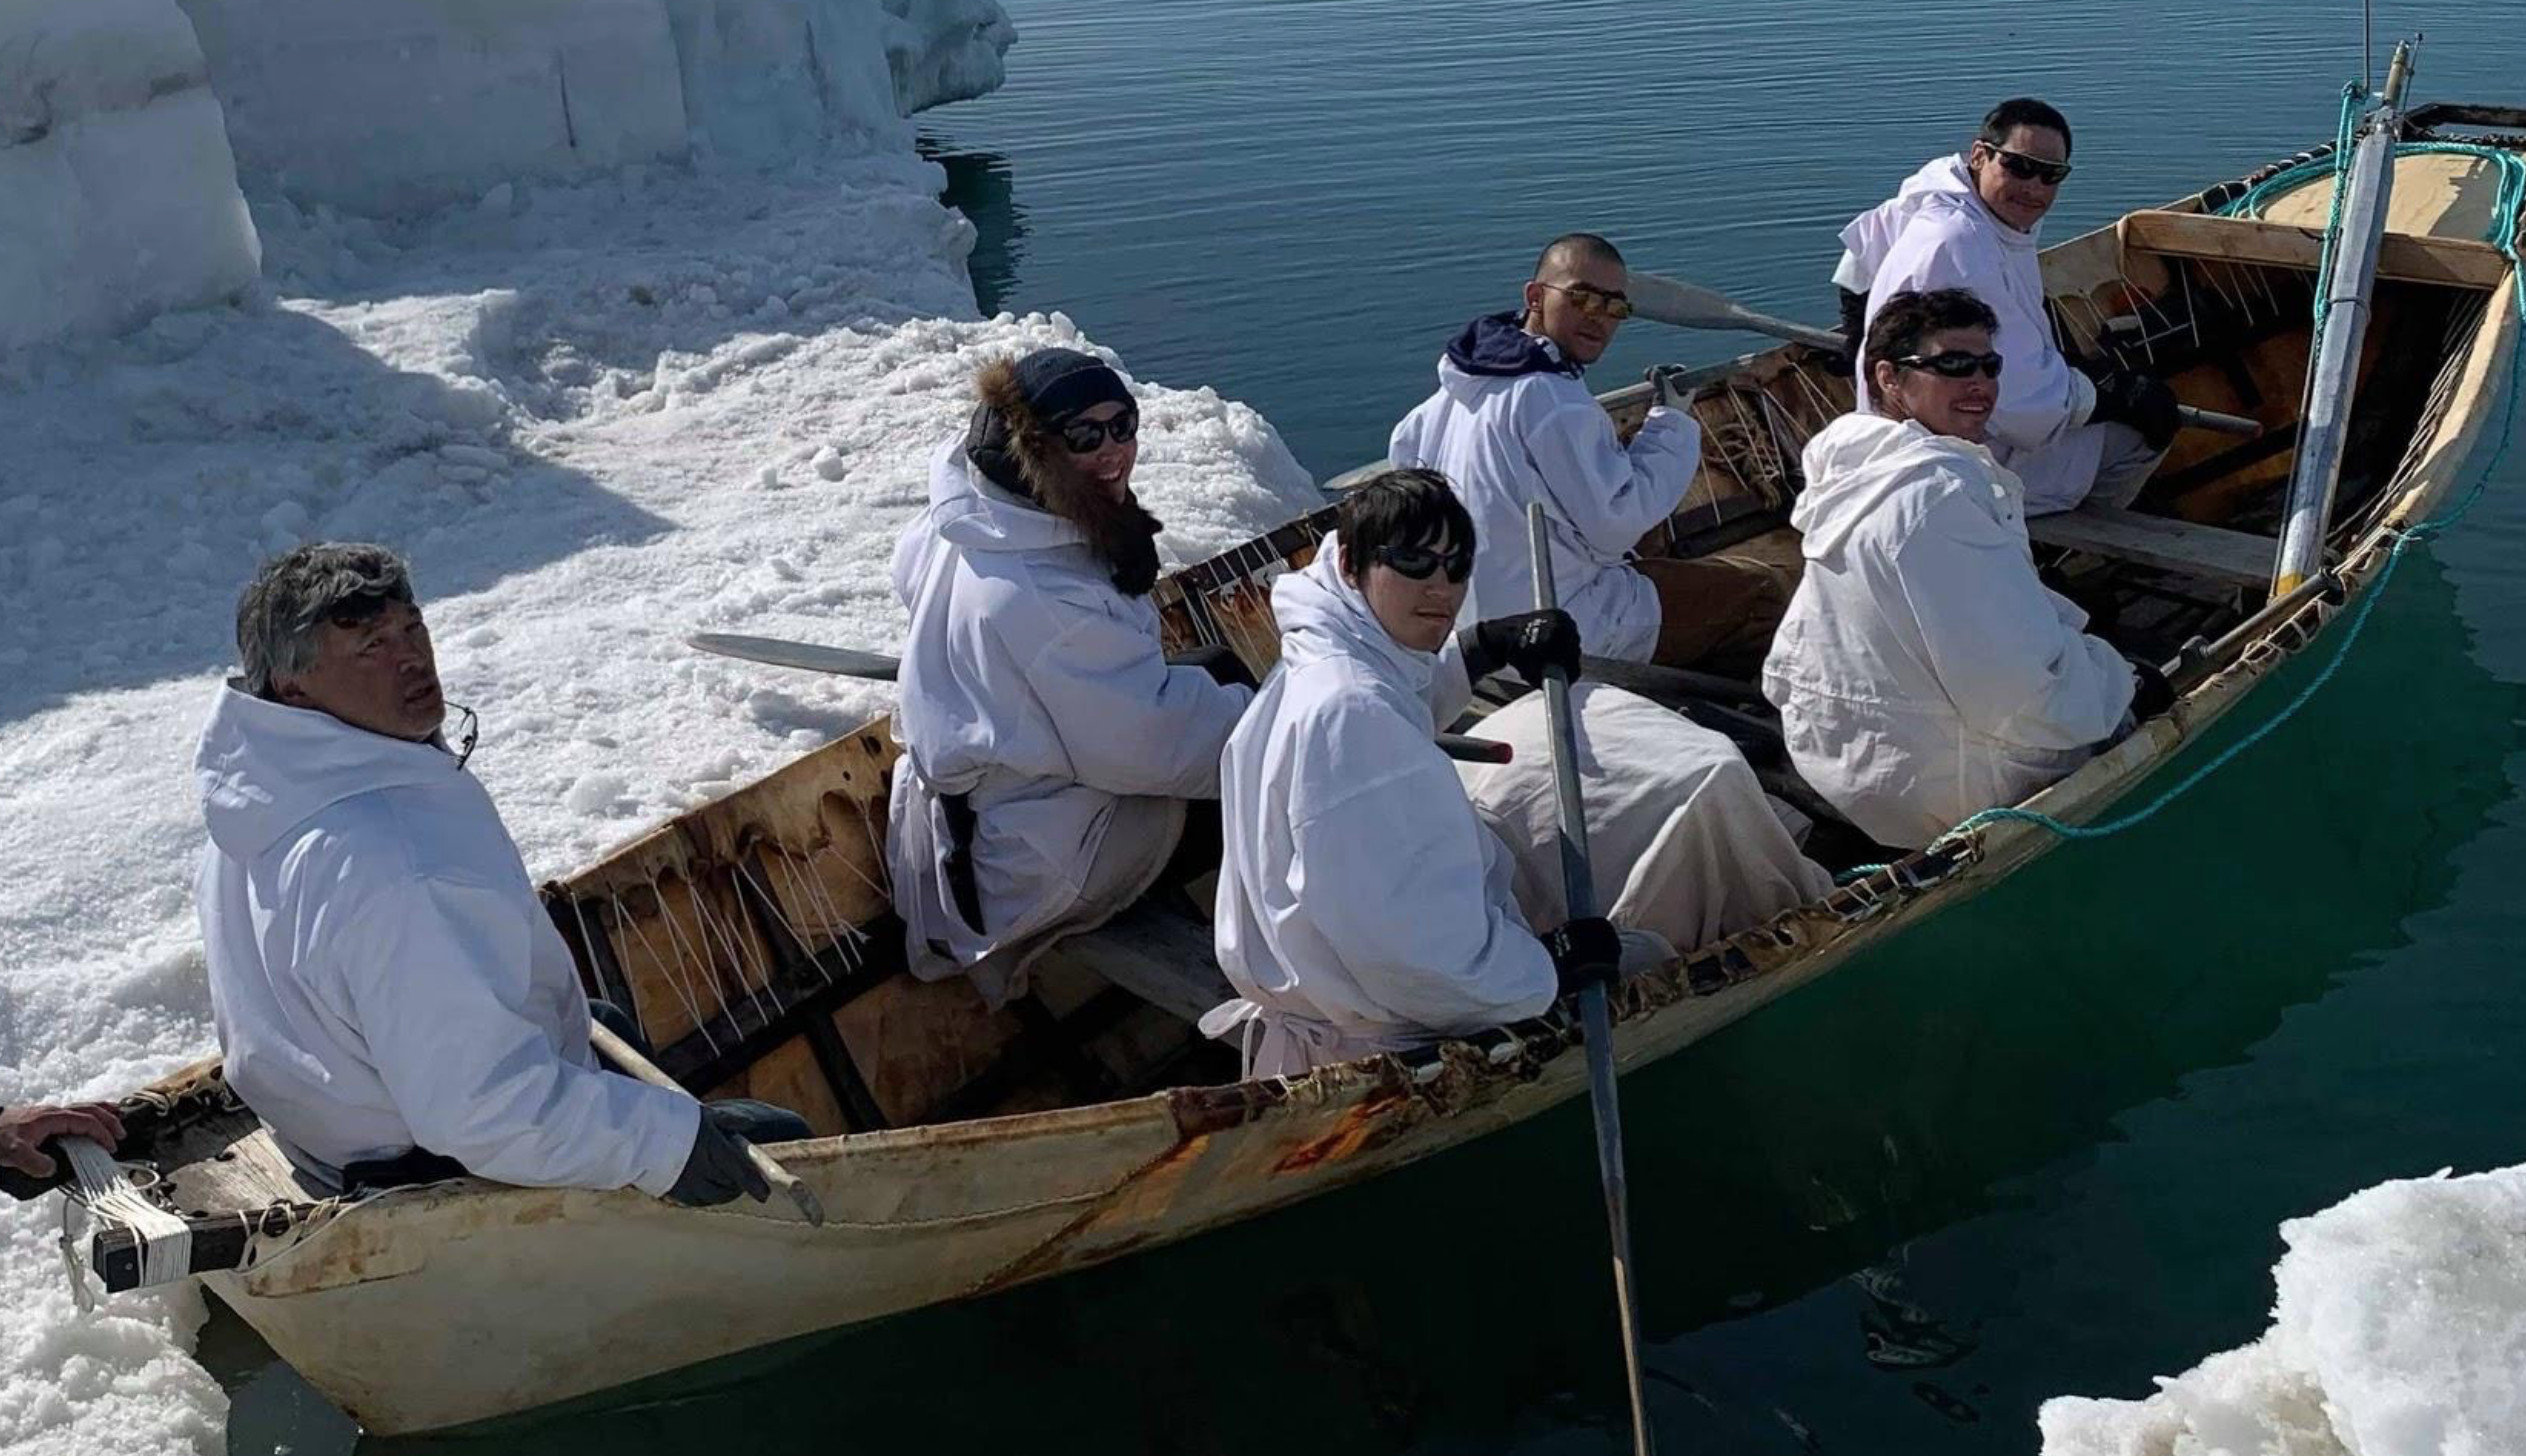 Gordon Ikayuak Brower and his whaling crew about to get out in open water on their traditional umiaq/seal skin boat. Photo: Courtesy of Gordon Ikayuak Brower